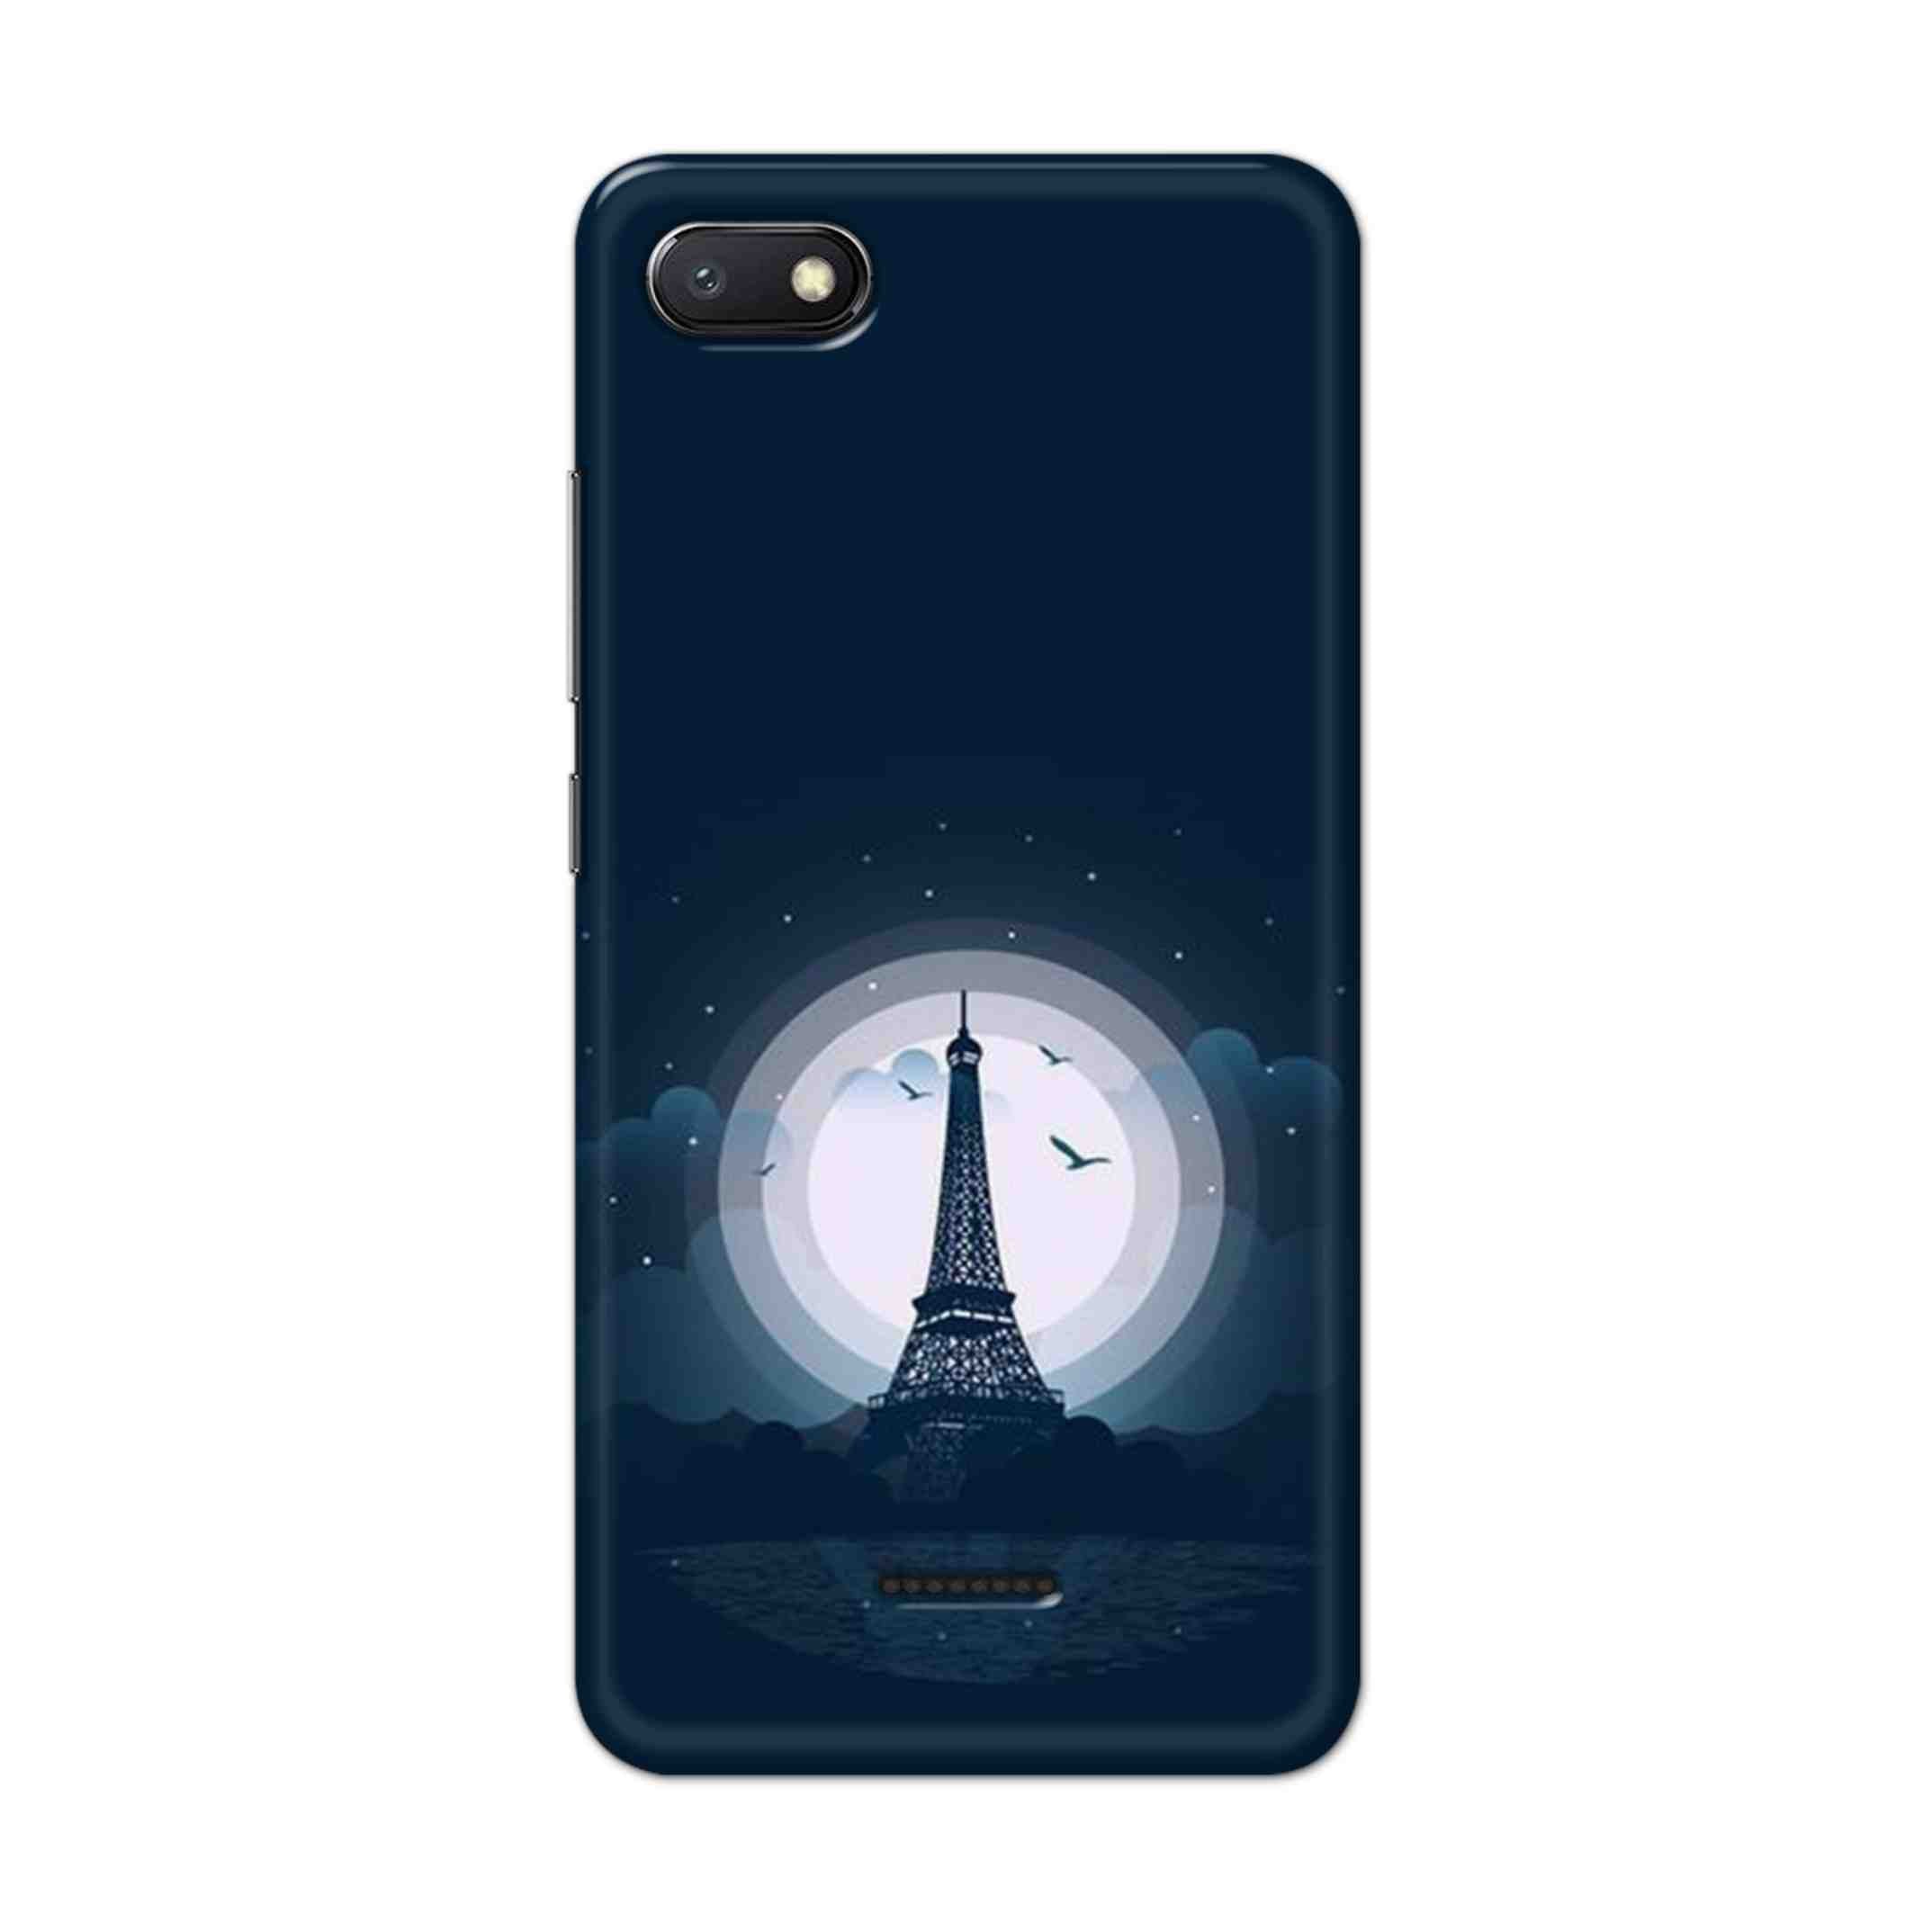 Buy Paris Eiffel Tower Hard Back Mobile Phone Case/Cover For Xiaomi Redmi 6A Online